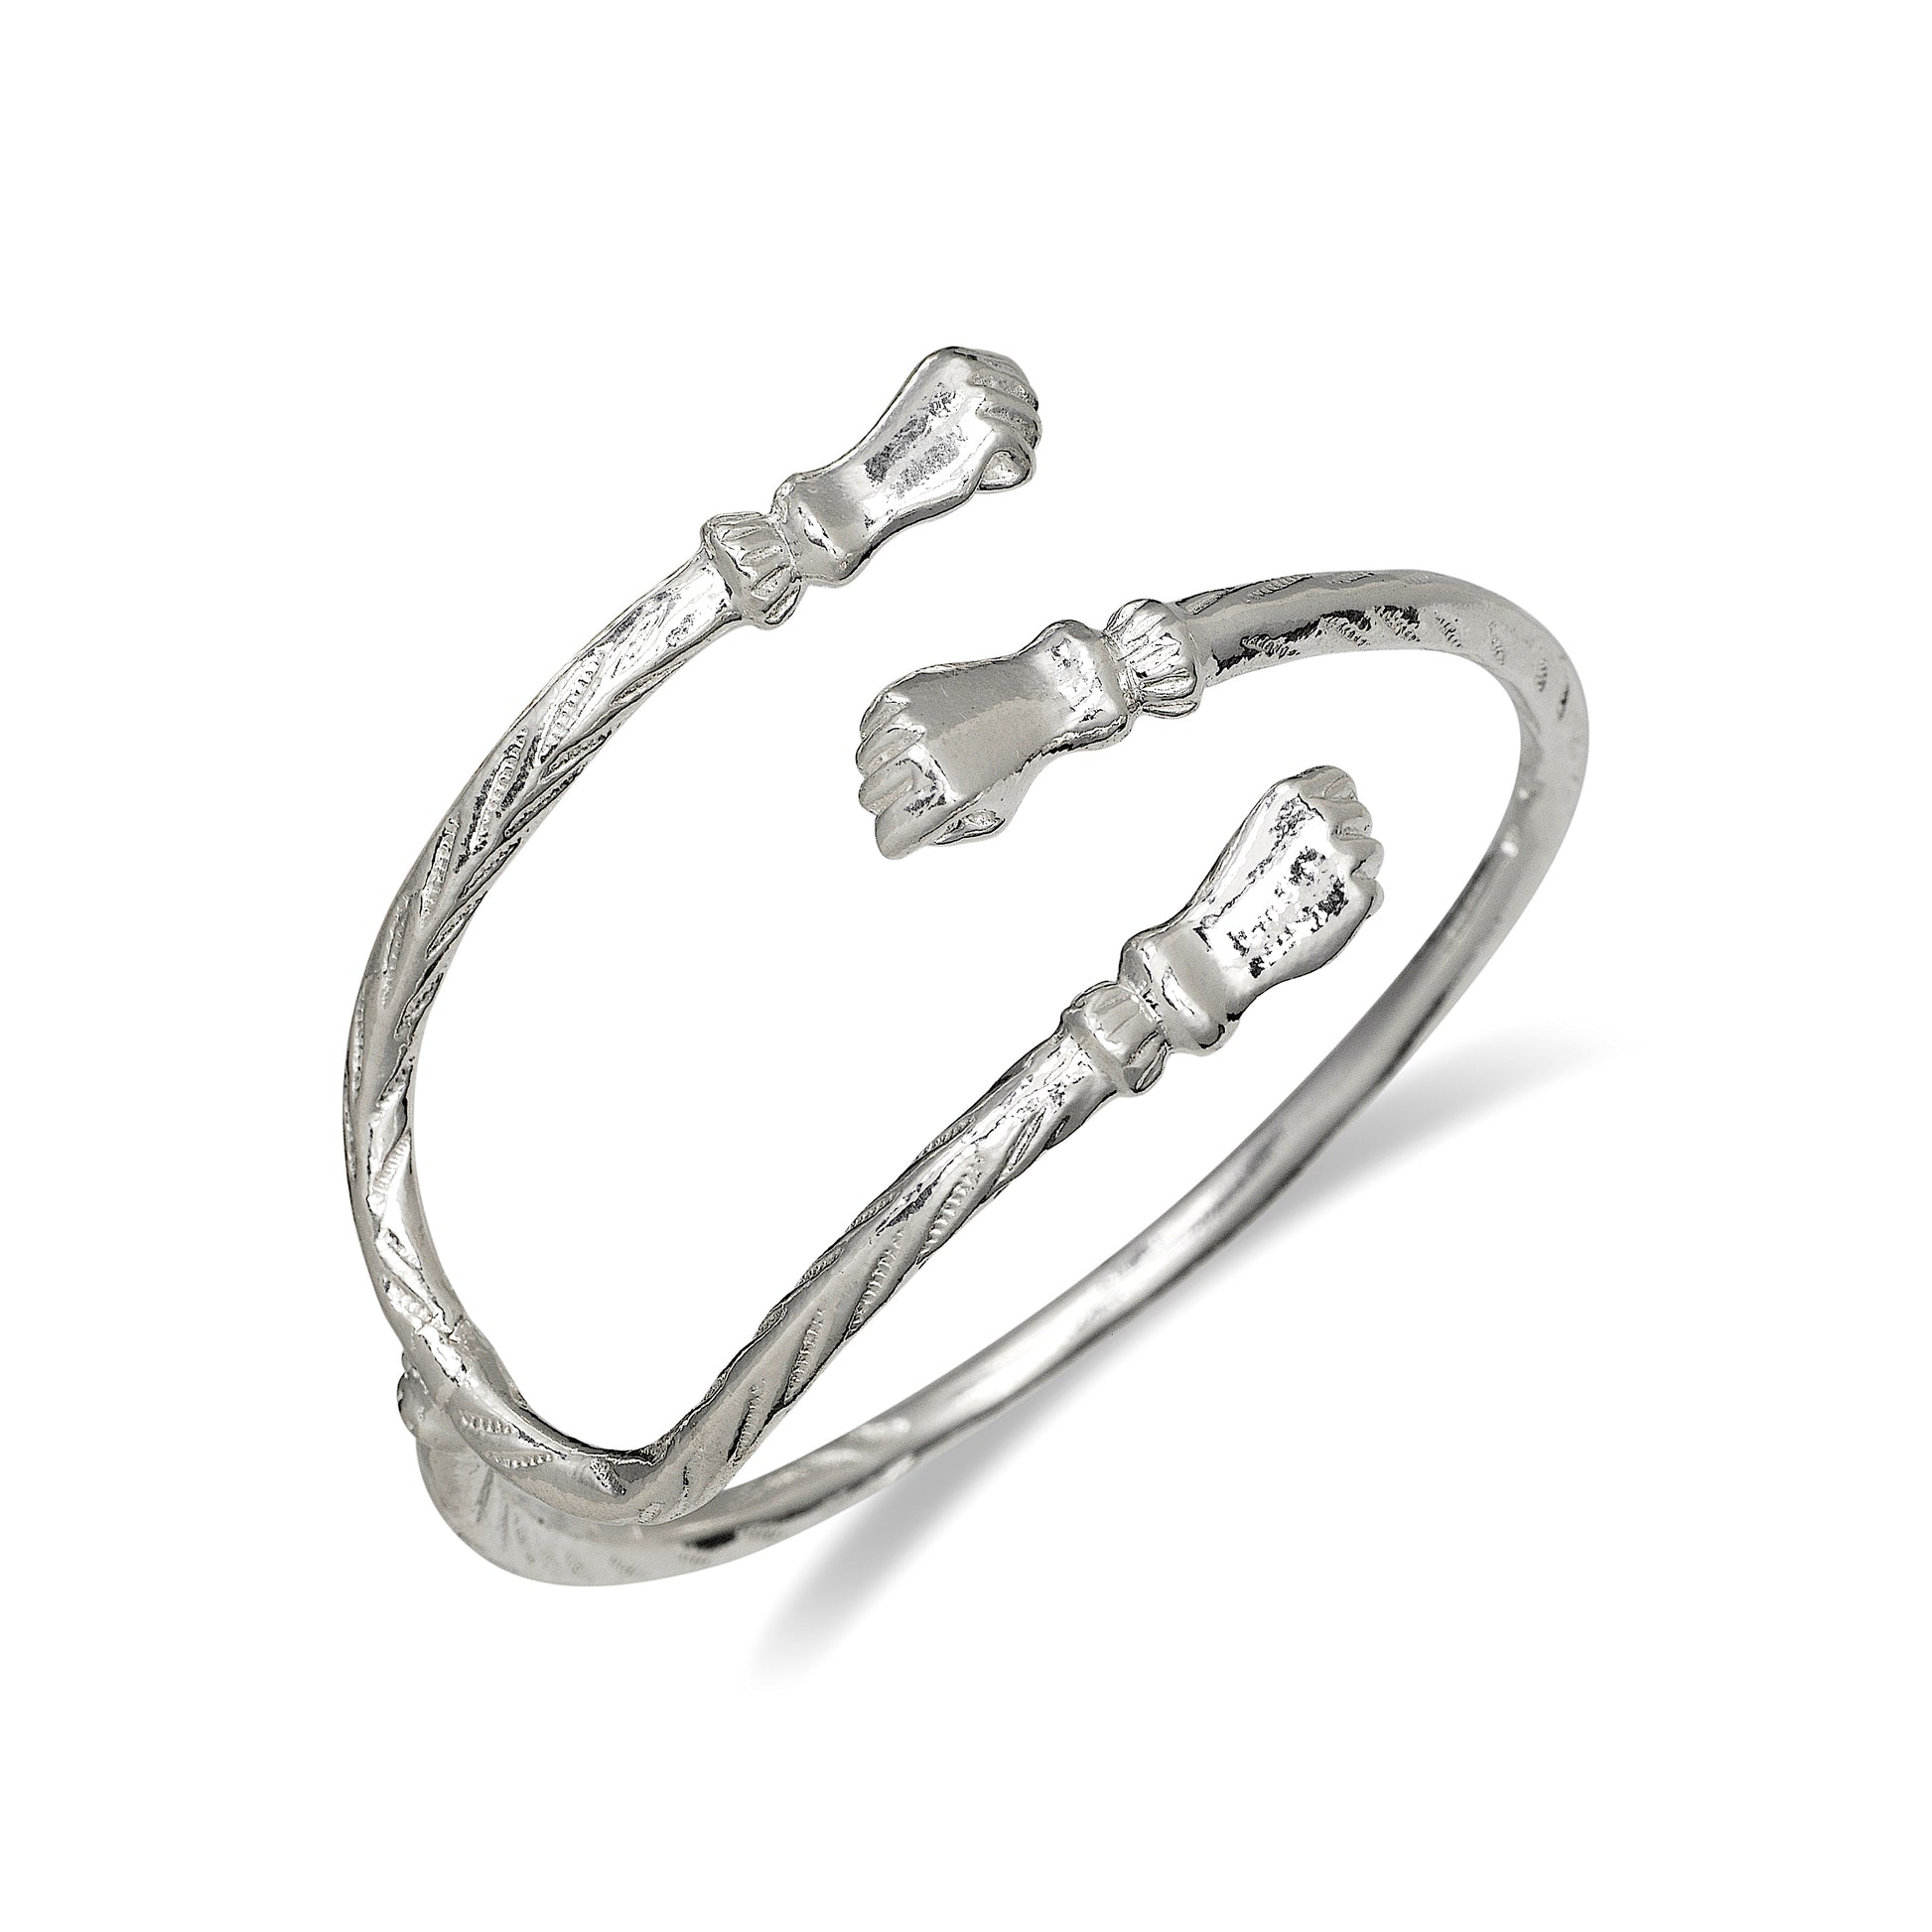 Tri-Tip 925 Solid Sterling Silver West Indian Bangle with Fists Ends